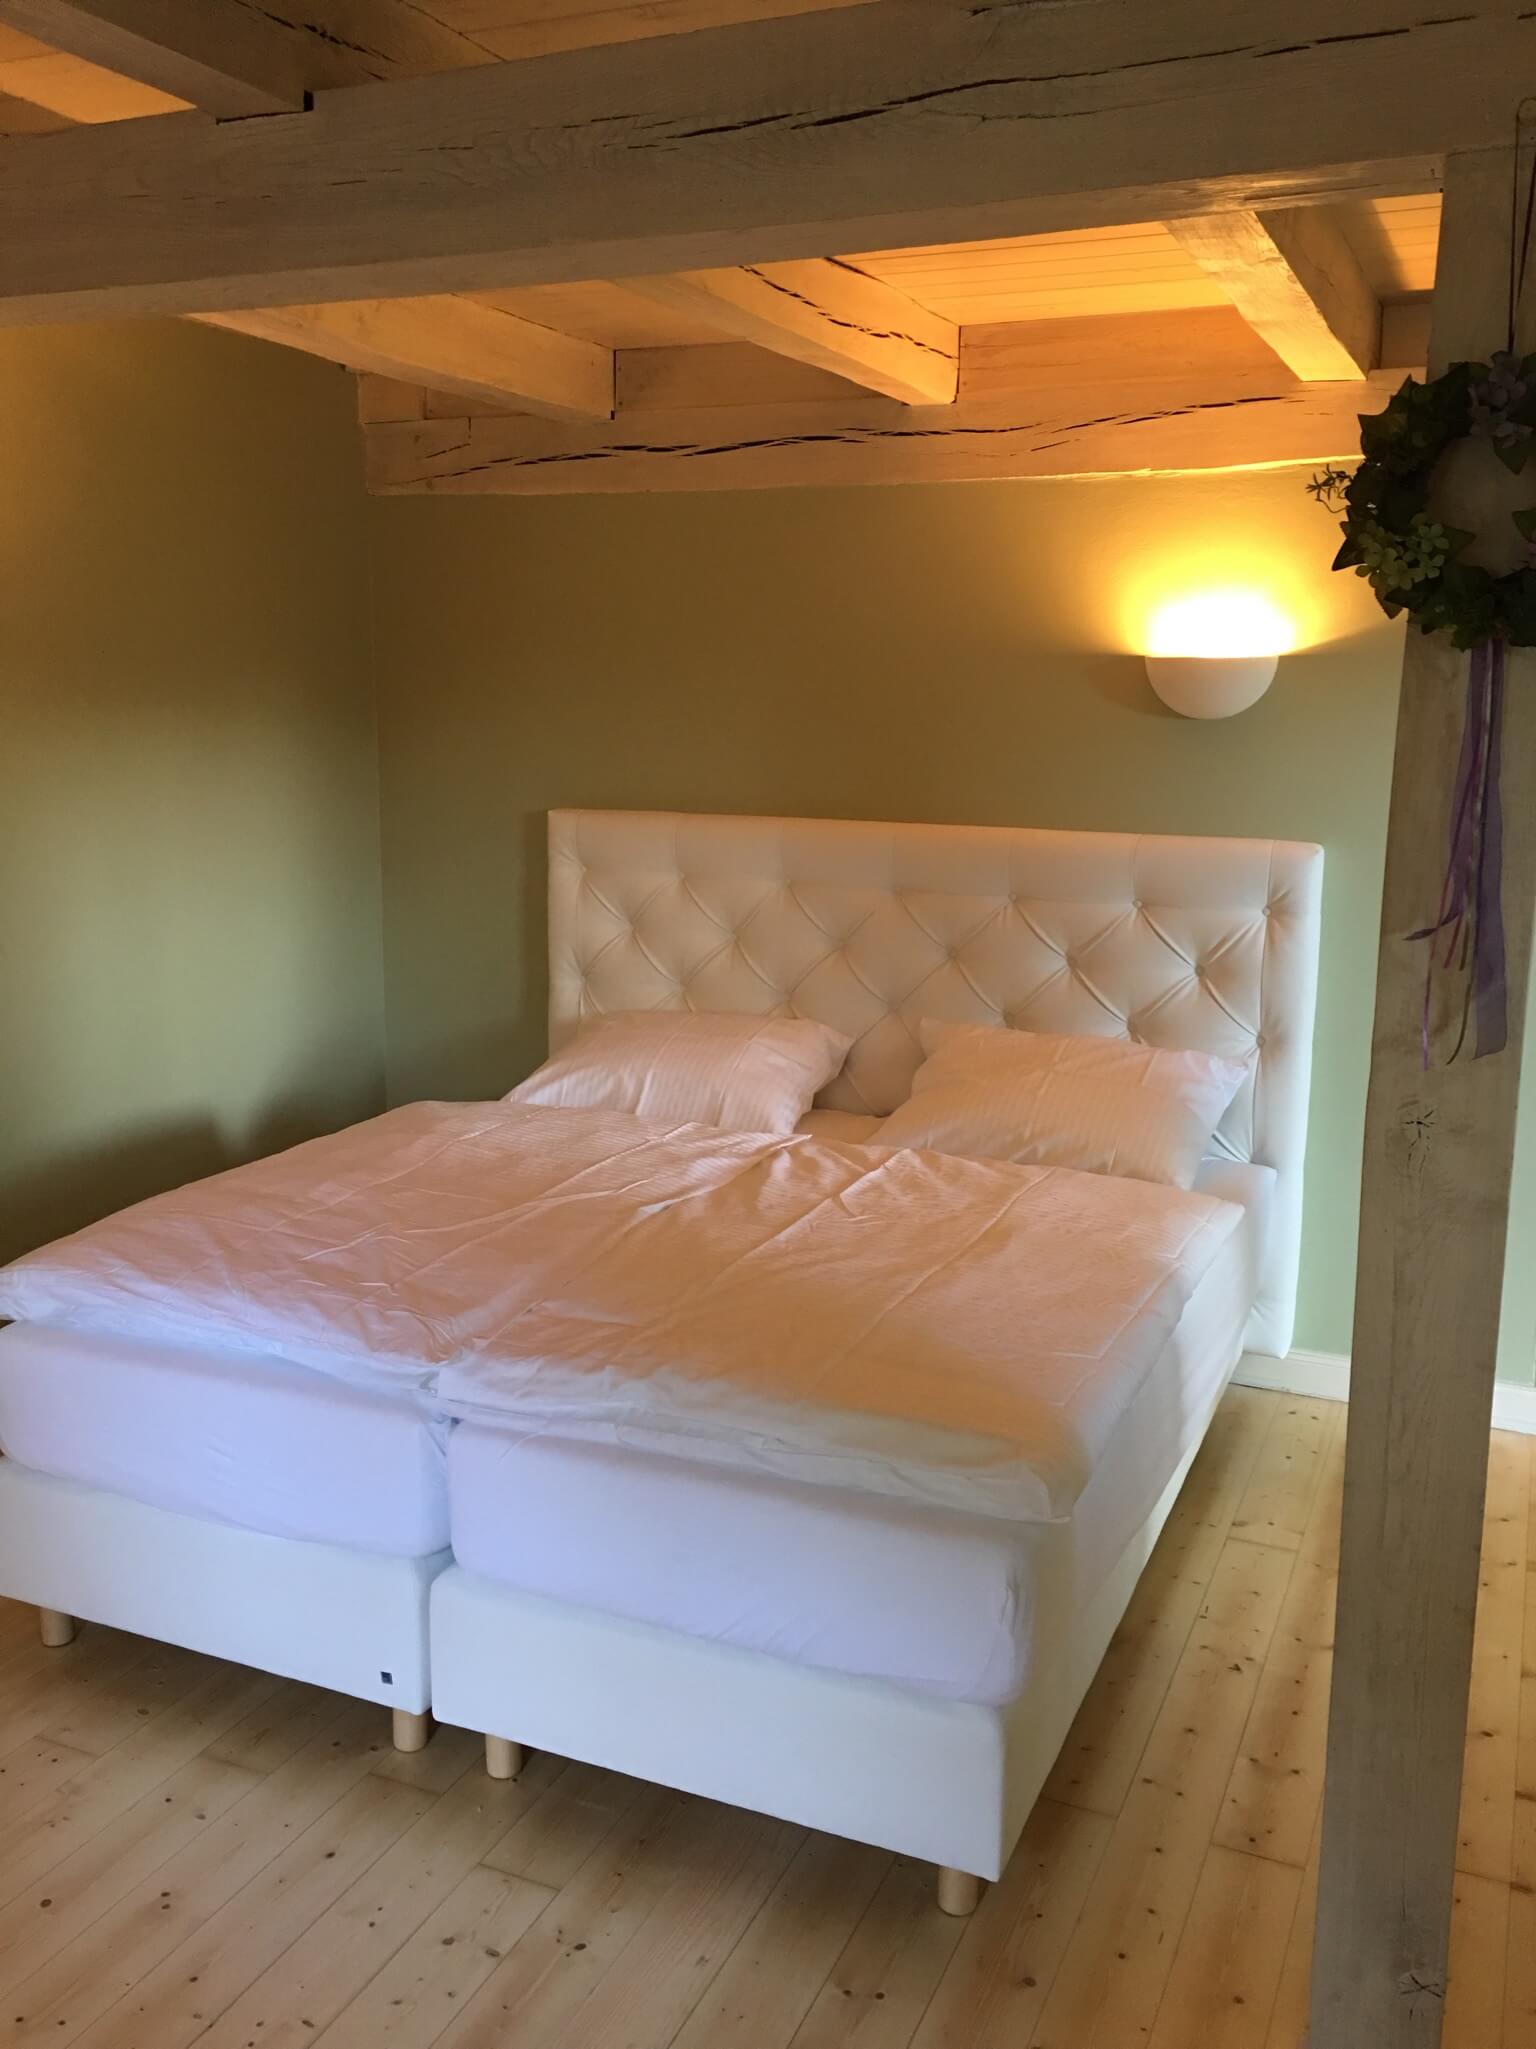 Cozy box spring king size bed on wooden floor